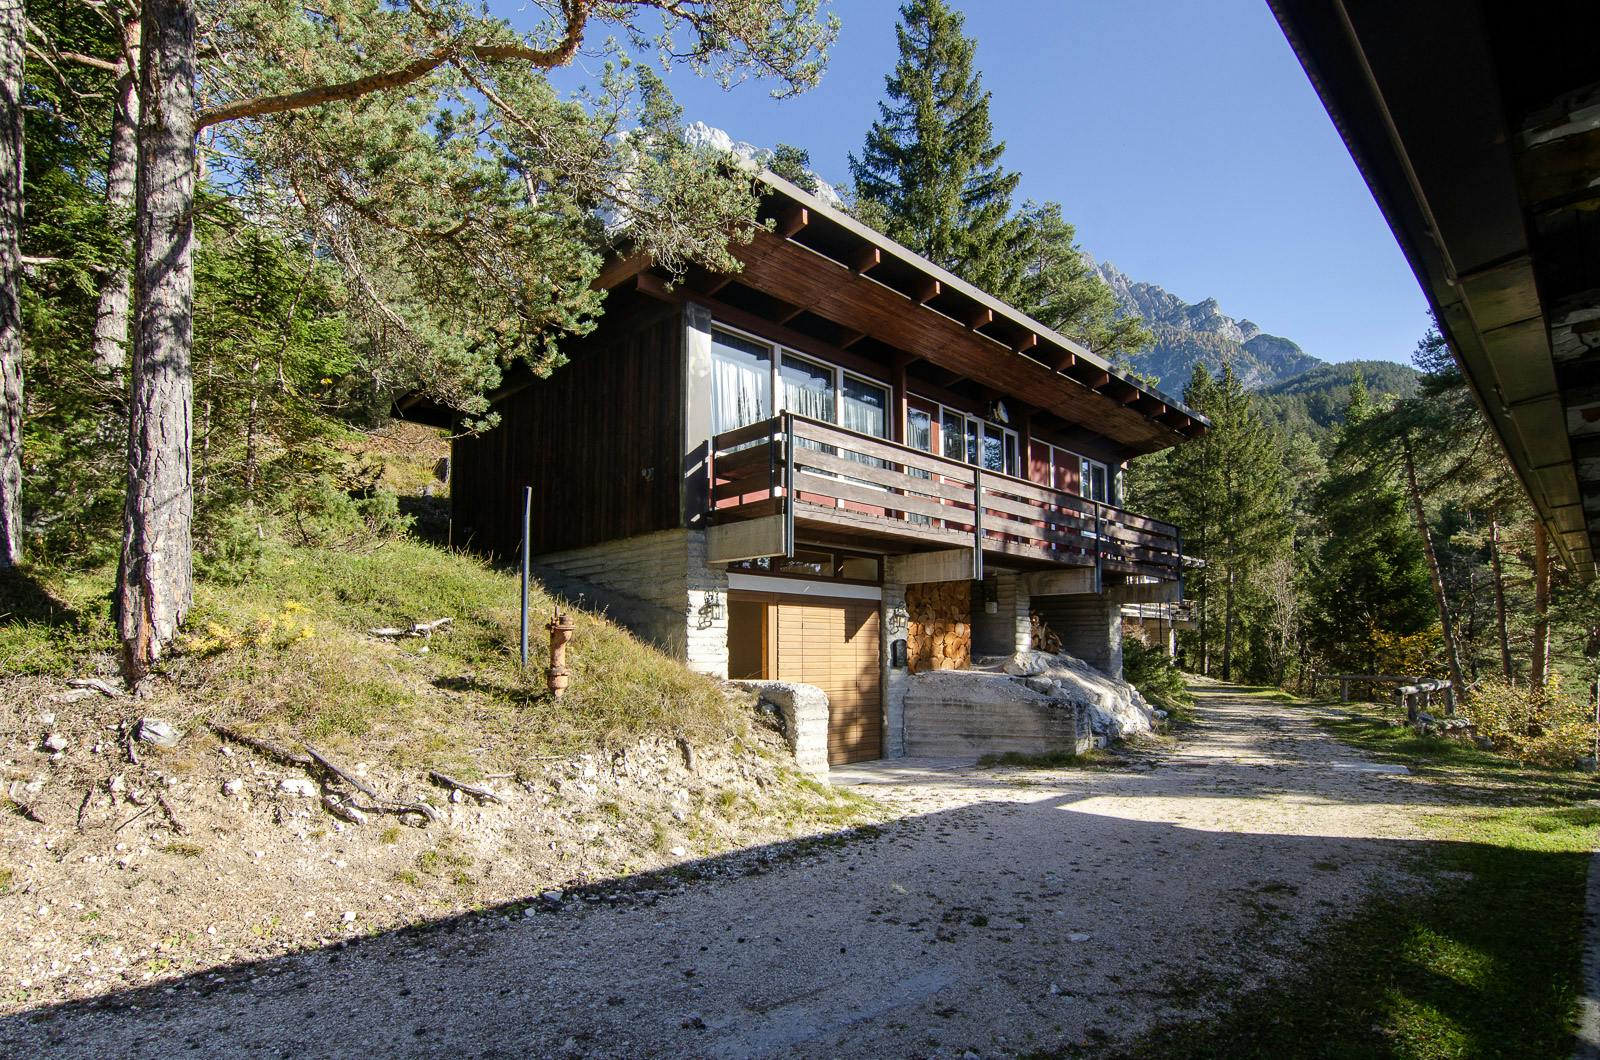  - Chalet - Chalet nel verde stagionale/annuale         ANCHE FORESTERIA